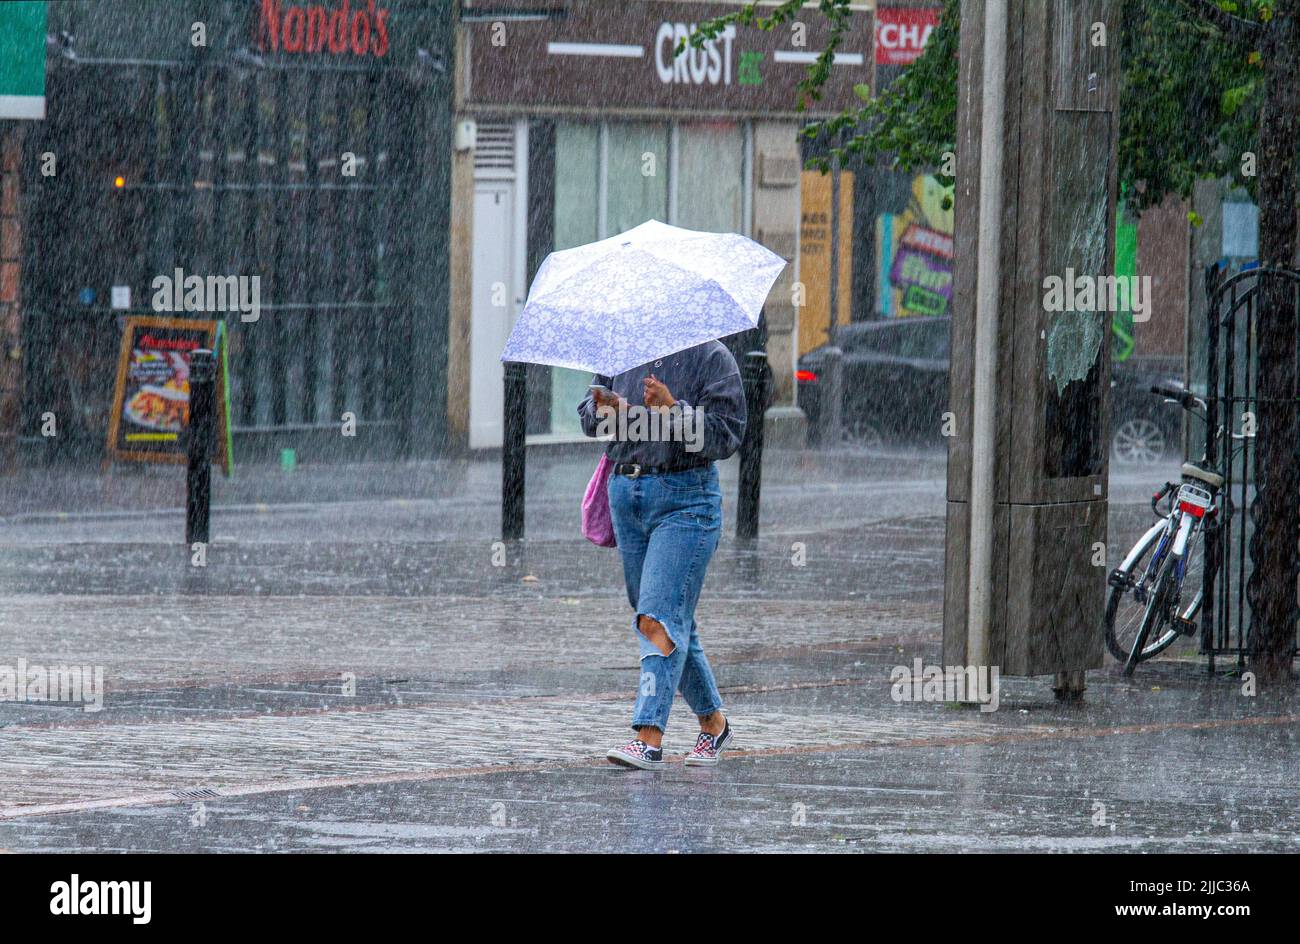 Dundee, Tayside, Scotland, UK. 25th July, 2022. UK Weather: The combination of unexpected, heavy showers and humidity caused temperatures to exceed 18°C in some areas of North East Scotland. Monday morning shoppers are caught off guard by sudden heavy downpours in Dundee city centre. Credit: Dundee Photographics/Alamy Live News Stock Photo